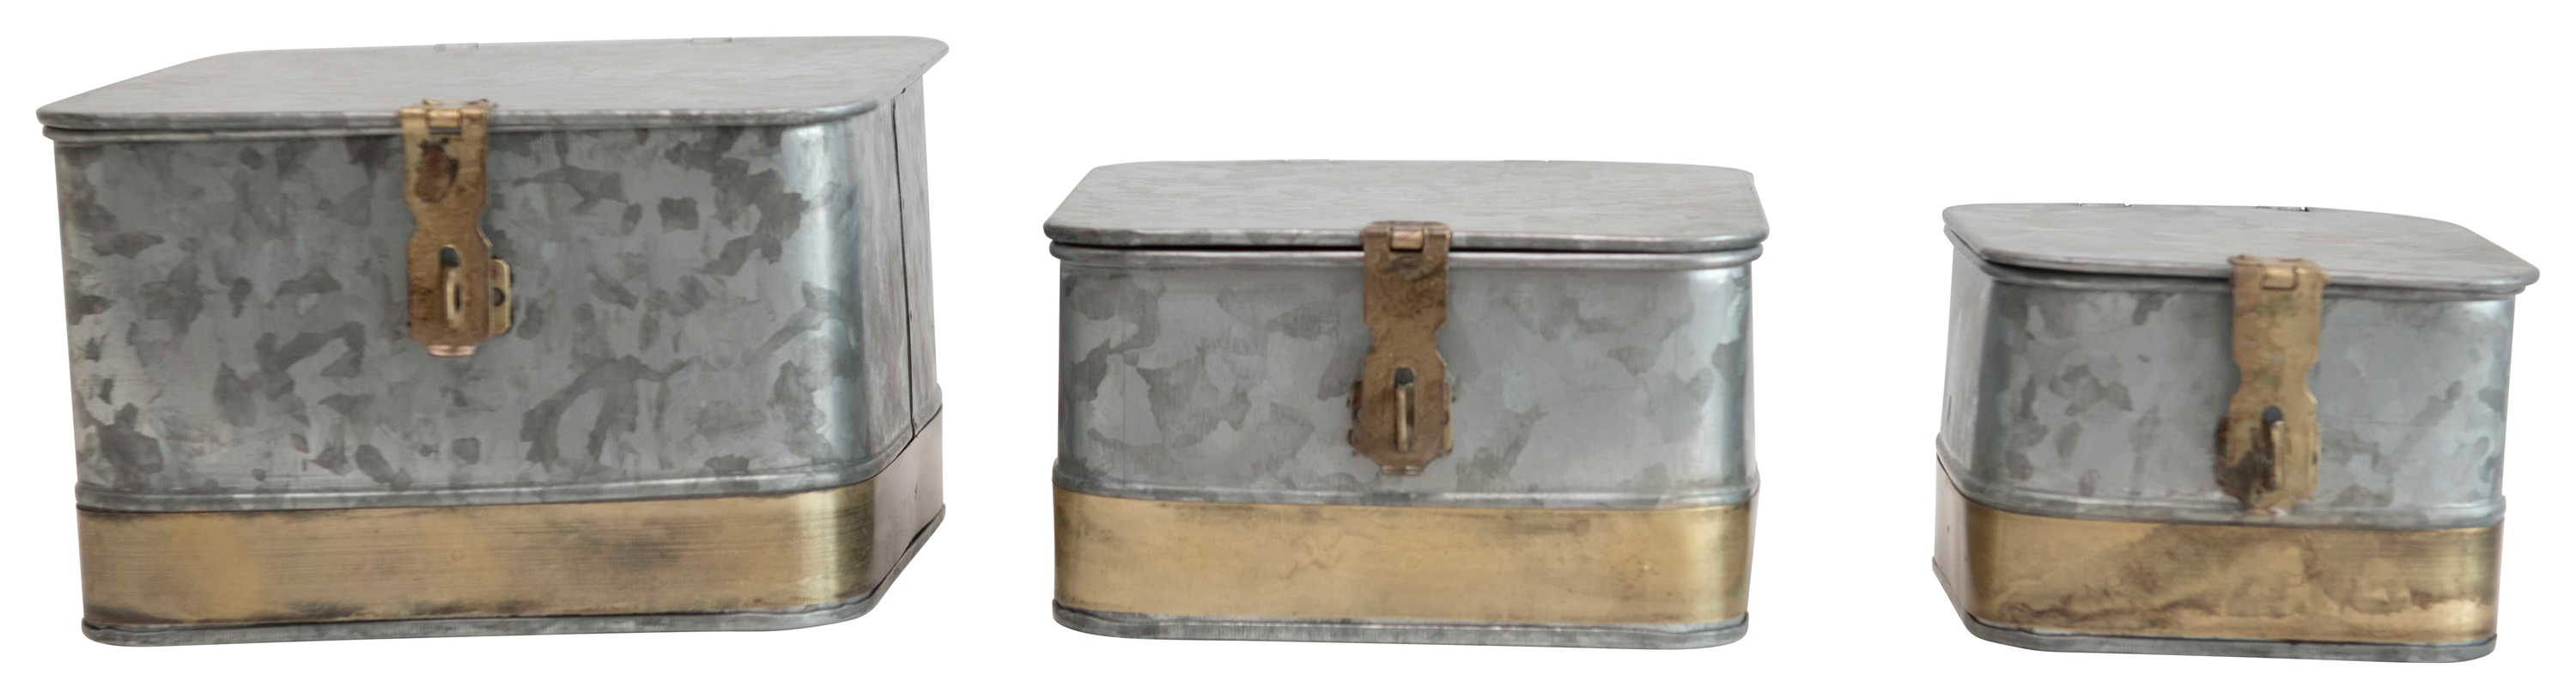 Decorative Galvanized Metal Boxes with Lids & Brass Accents (Set of 3 Sizes) - Image 0